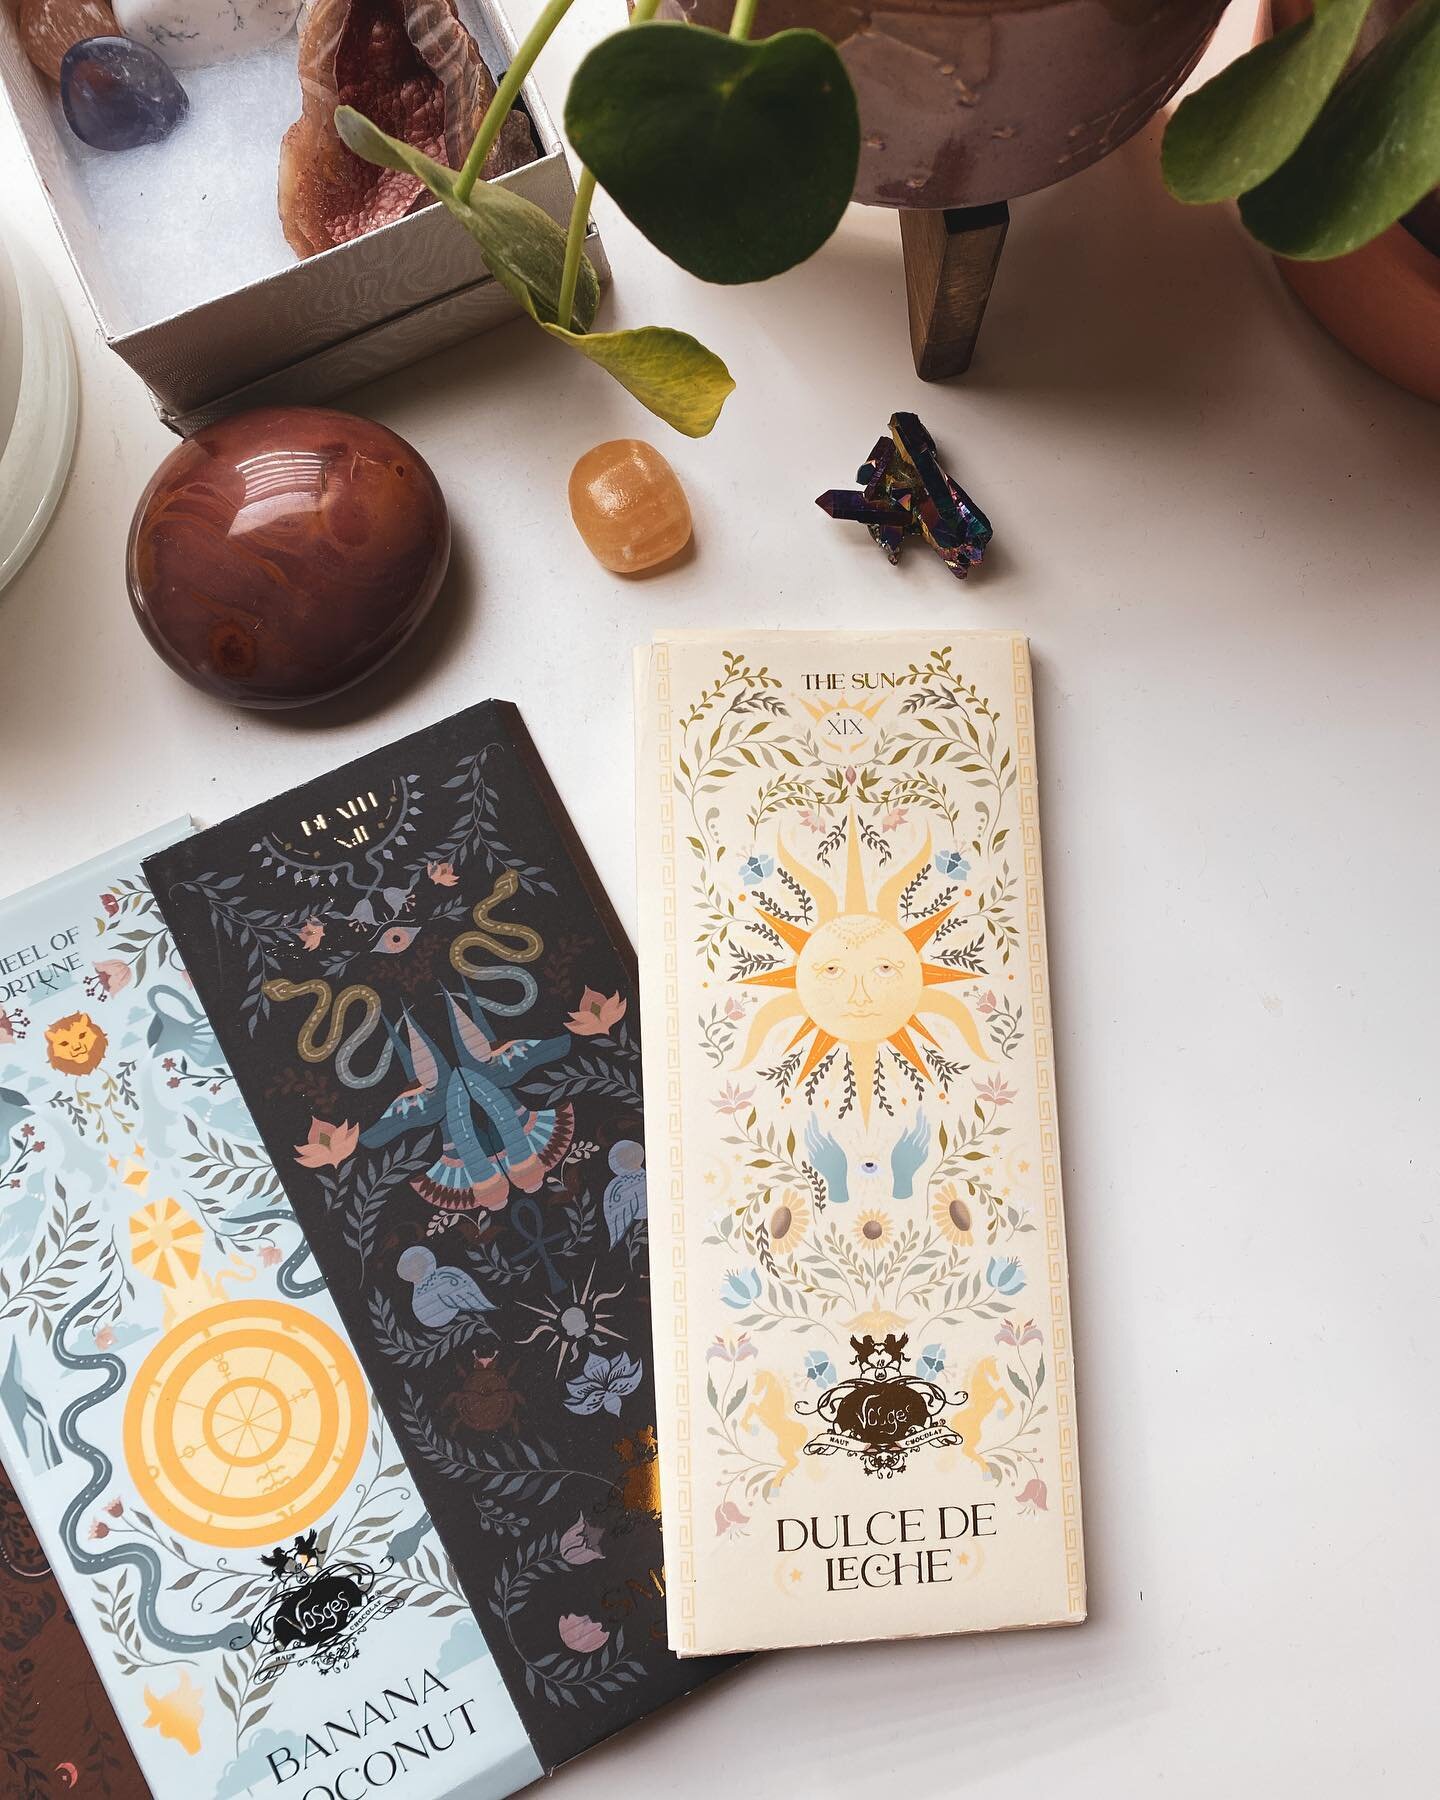 Had so much fun designing this series of Chocolate Tarot 🍫 
This was one of my last projects ever at #SCAD and I&rsquo;m so excited to share it with all of you (mostly because I have graduated haha)
✌️ 
.
.
.
.
.
.
.
#chocolatepackaging #chocolateta